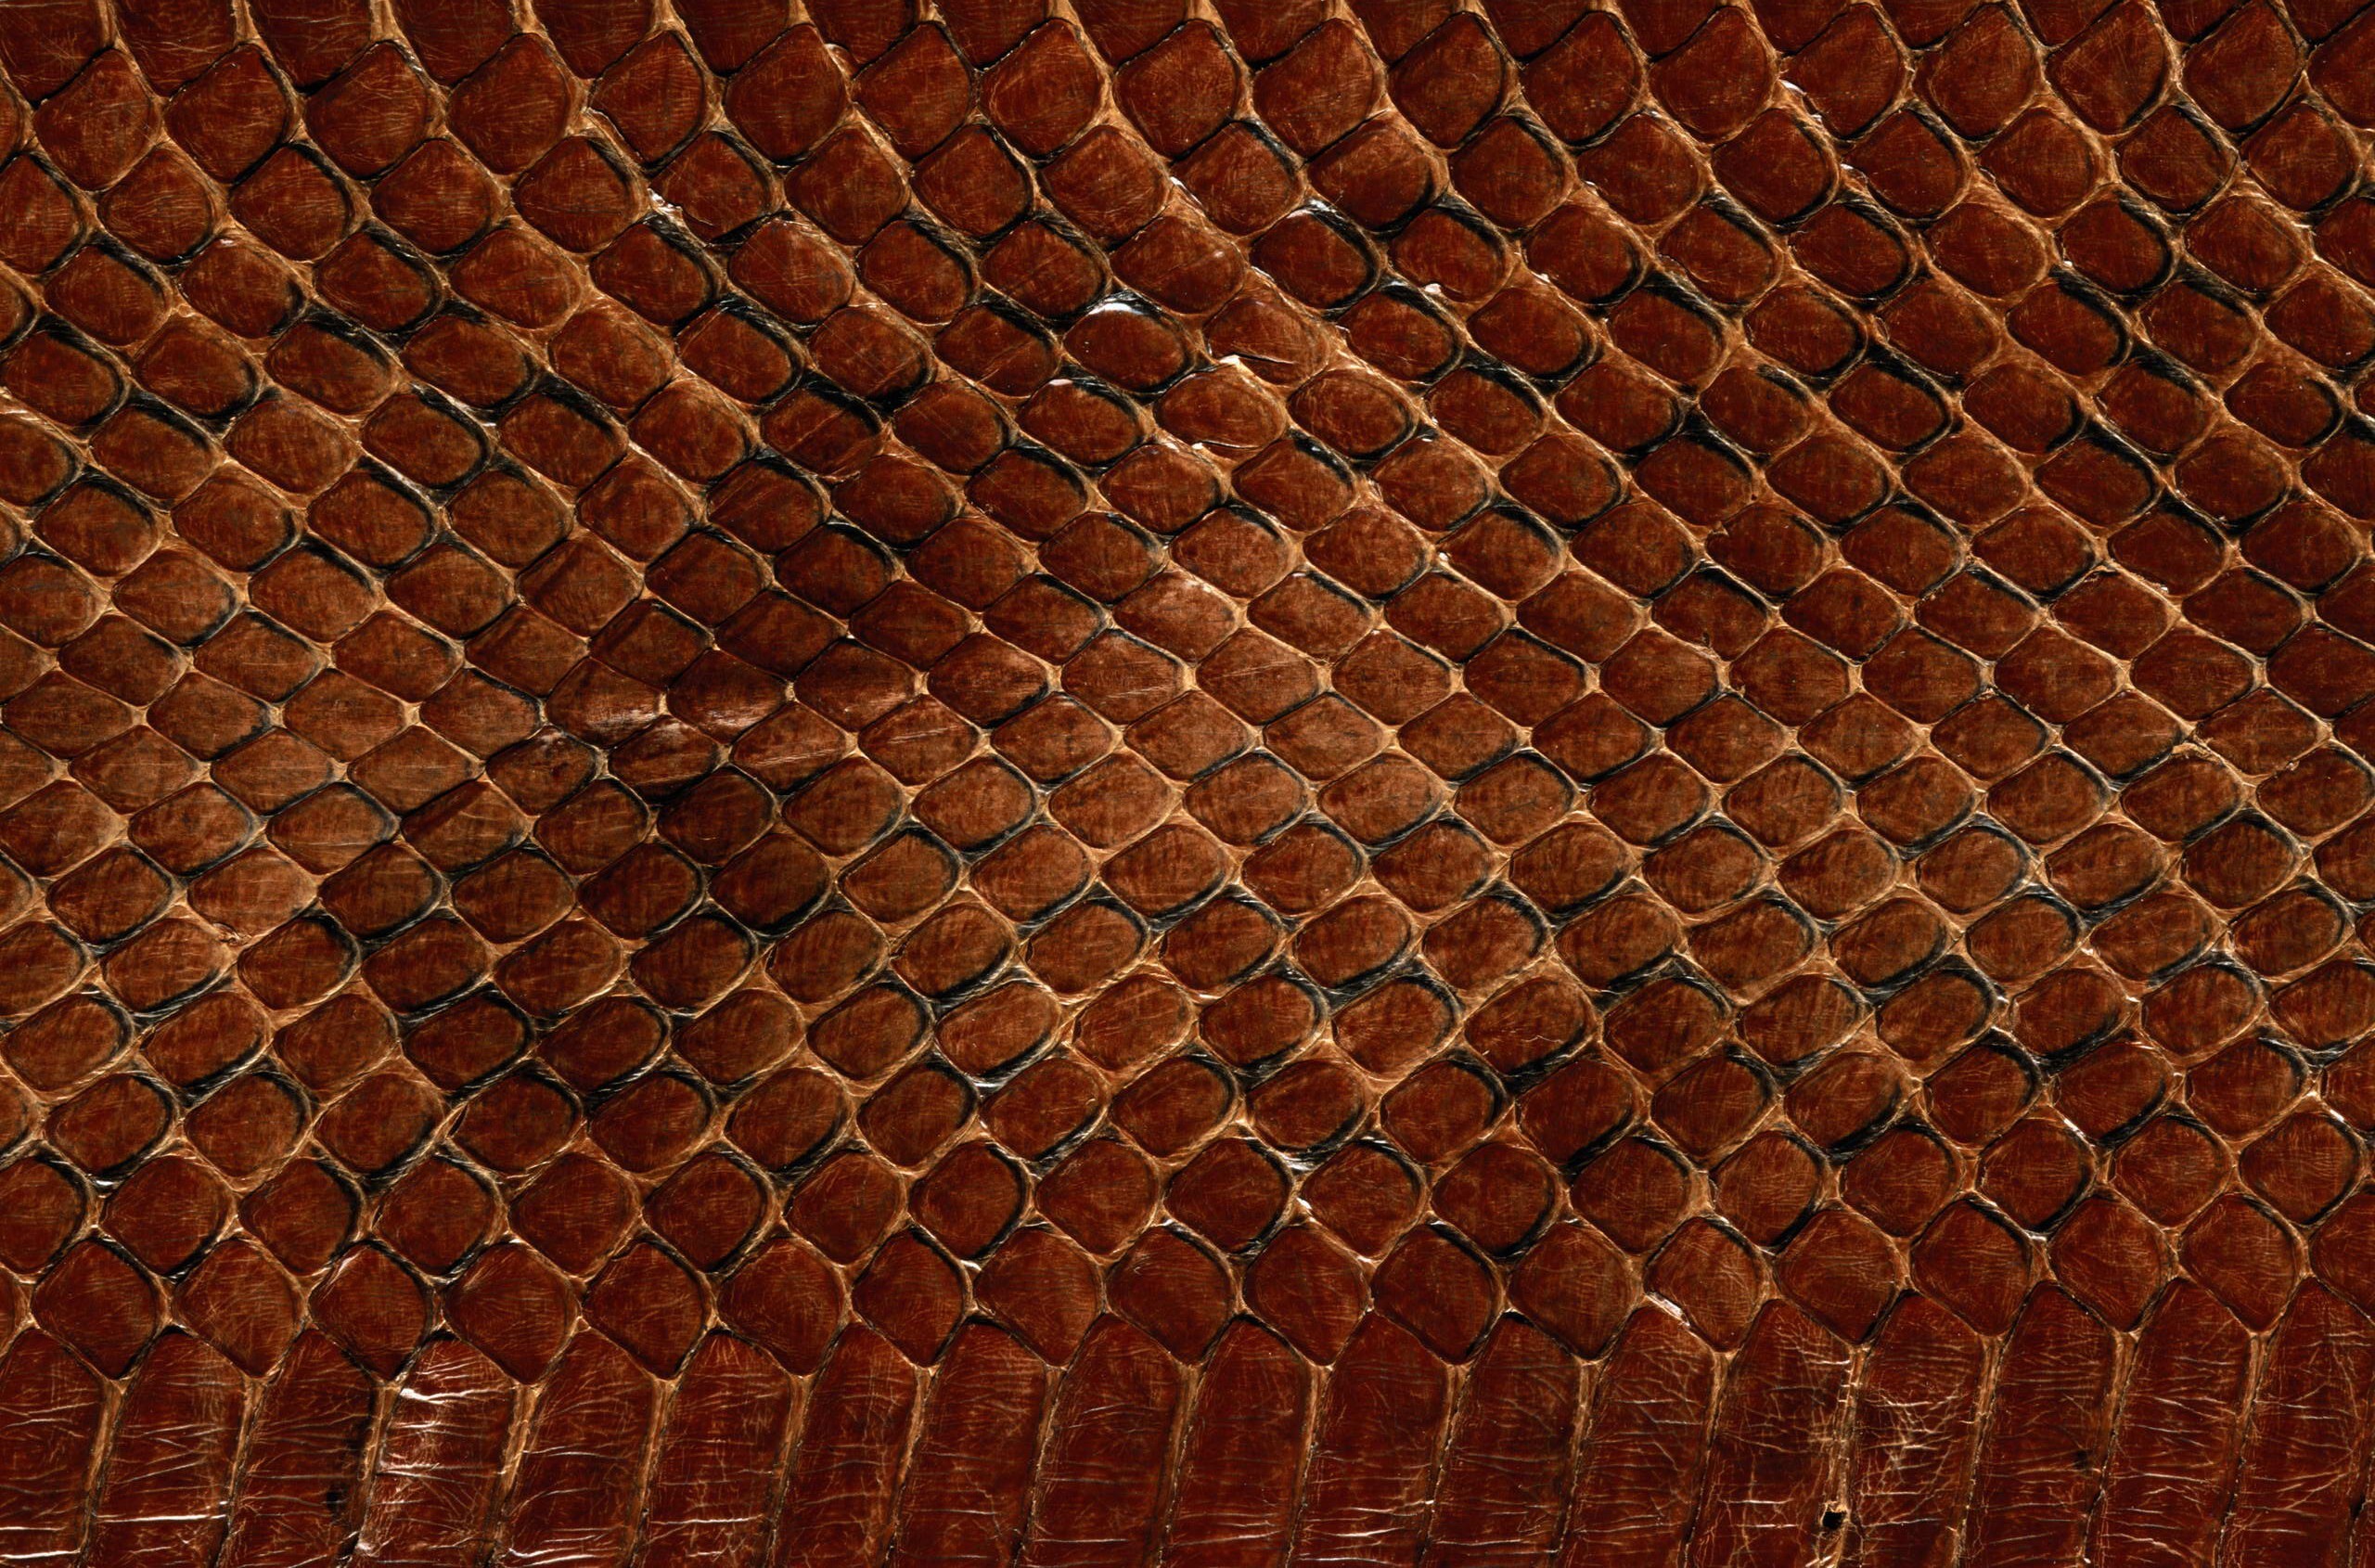 Wallpaper Texture Of The Skin Snake Scales Animal